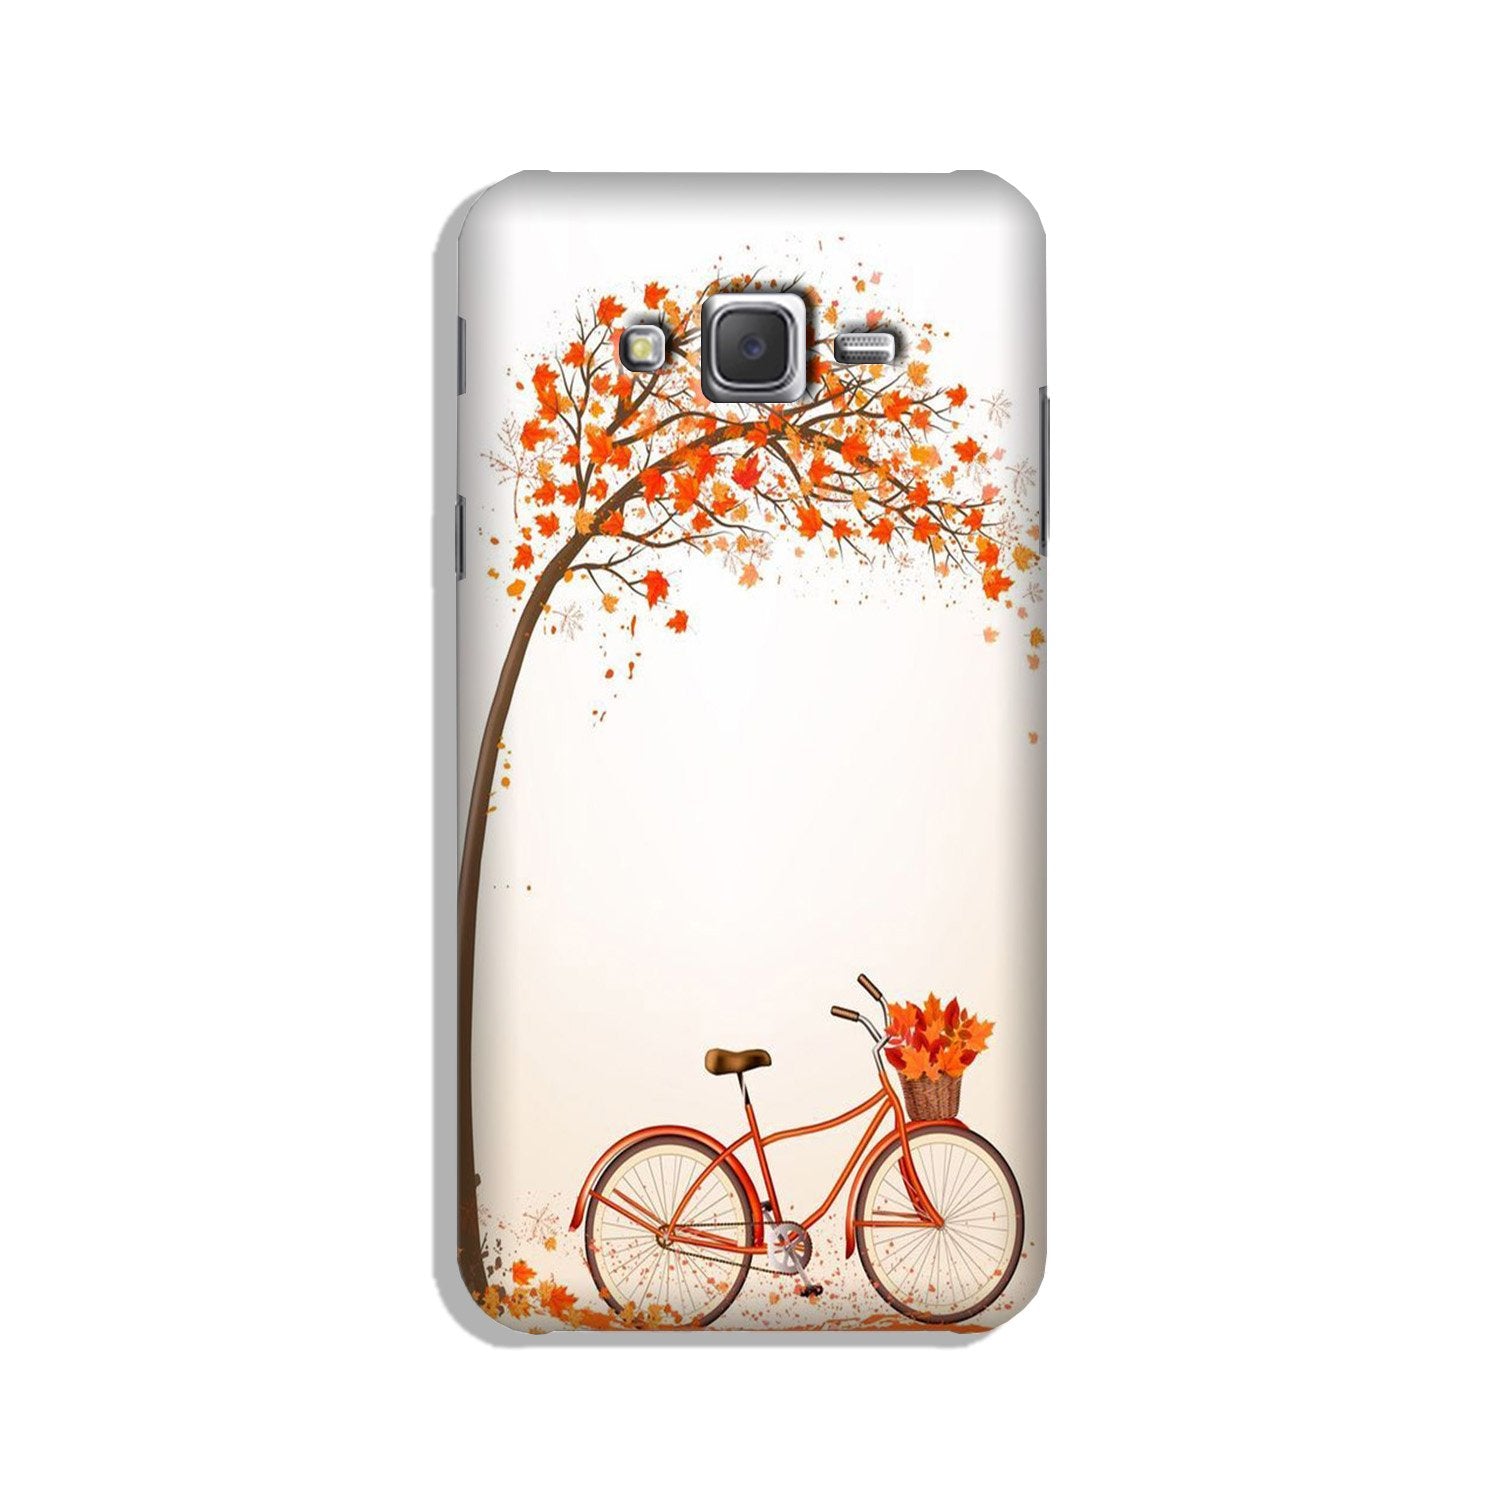 Bicycle Case for Galaxy J7 Nxt (Design - 192)